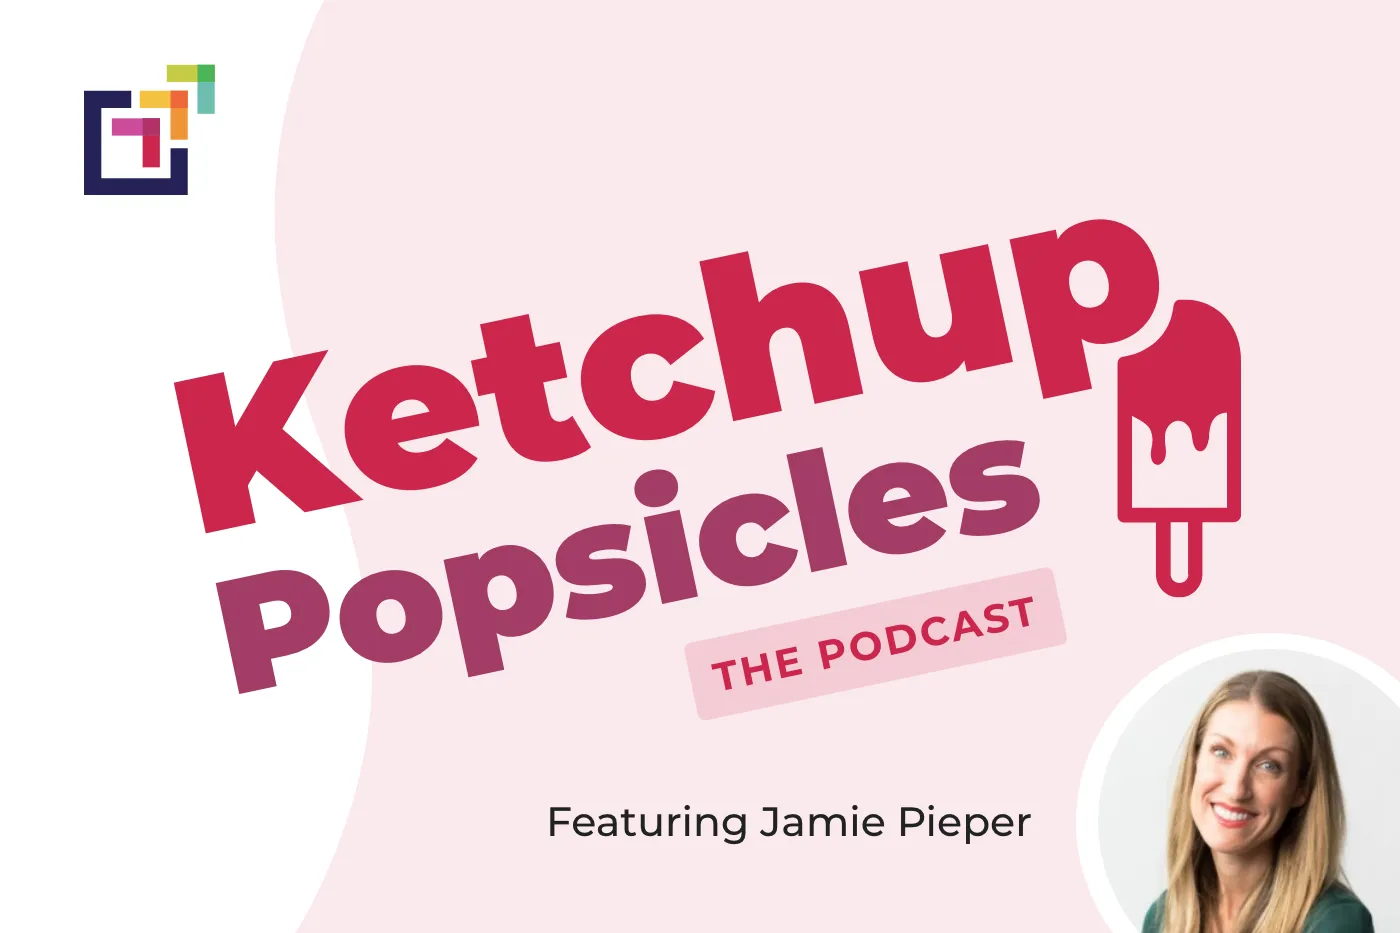 Peer Sales Agency - Ketchup Popsicles Podcast Episode featuring Jamie Pieper